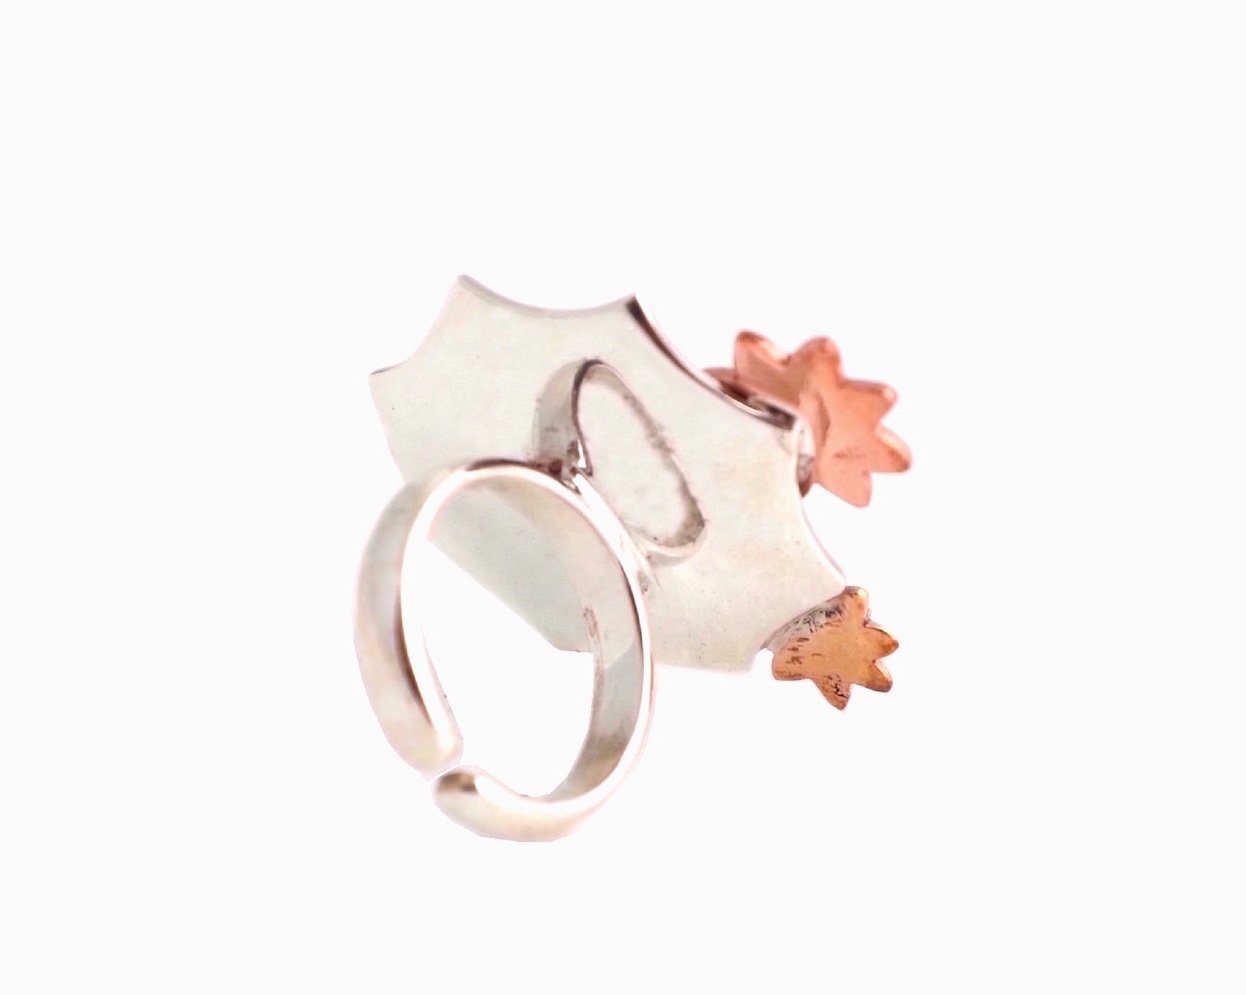 Back view of cocktail ring